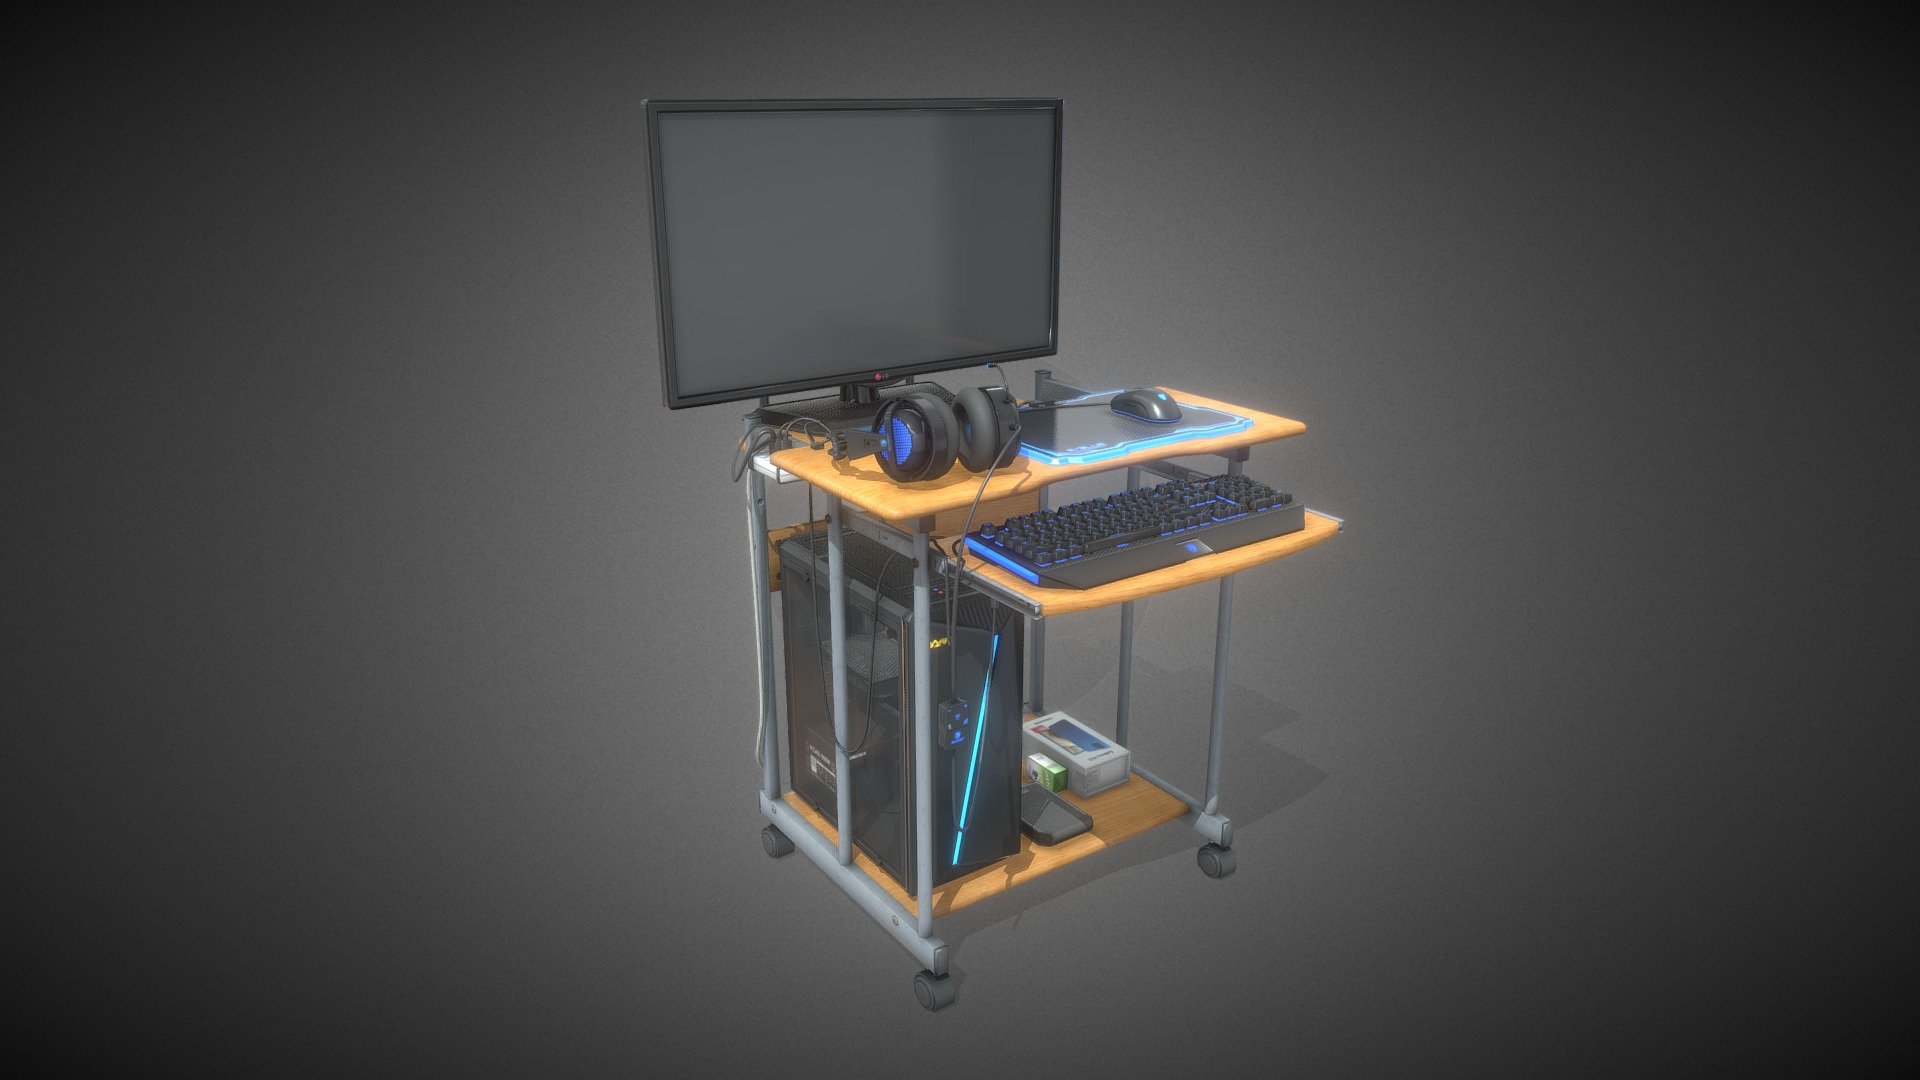 This is a Desktop PC i made using Blender and Substance Painter, using my real PC Setup as reference, and yes, use a TV as my Monitor, Here are the Product I Use




TV Monitor : LG TV

Keyboard : Sades Thyrsus RGB Mechanical Keyboard

Headphone : Sades Locust Plus

Mousepad : E-Blue EMP013 Flashy RGB Gaming MousePad

Mouse : Rexus Mouse Gaming Xierra G11

PC Specs : - NVidia 1050 GTX 2Gb
                      - 8 Gb RAM Corsair Vengeance LPX 4GB DDR4 Red
                      - Intel Core i5 
                      - Armageddon PC Case

Let me know what you think about the Model! - Desk And Computer (Desktop PC) - 3D model by Kevin Saleh (@Kevin.Saleh) 3d model